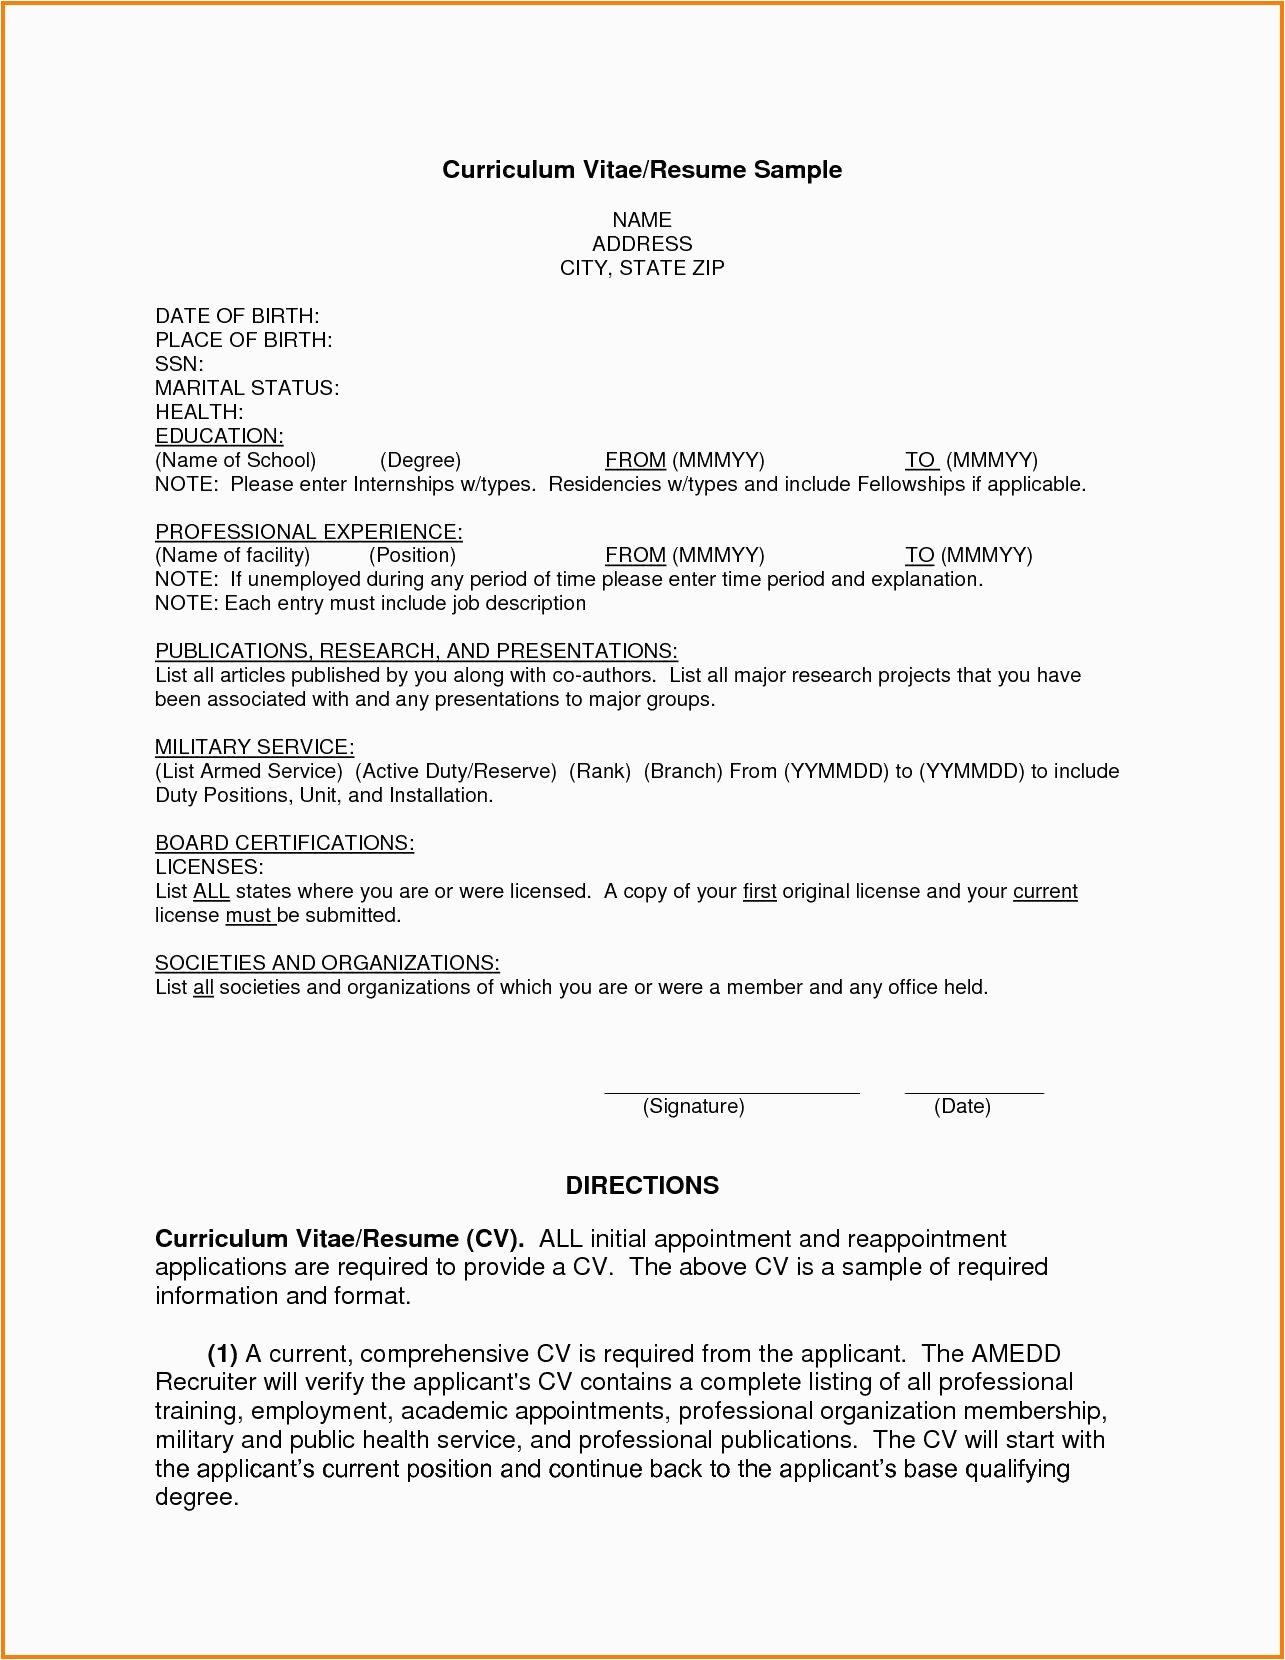 resume samples for jobs in canada awesome resume examples for part time jobs unique resume for part time job